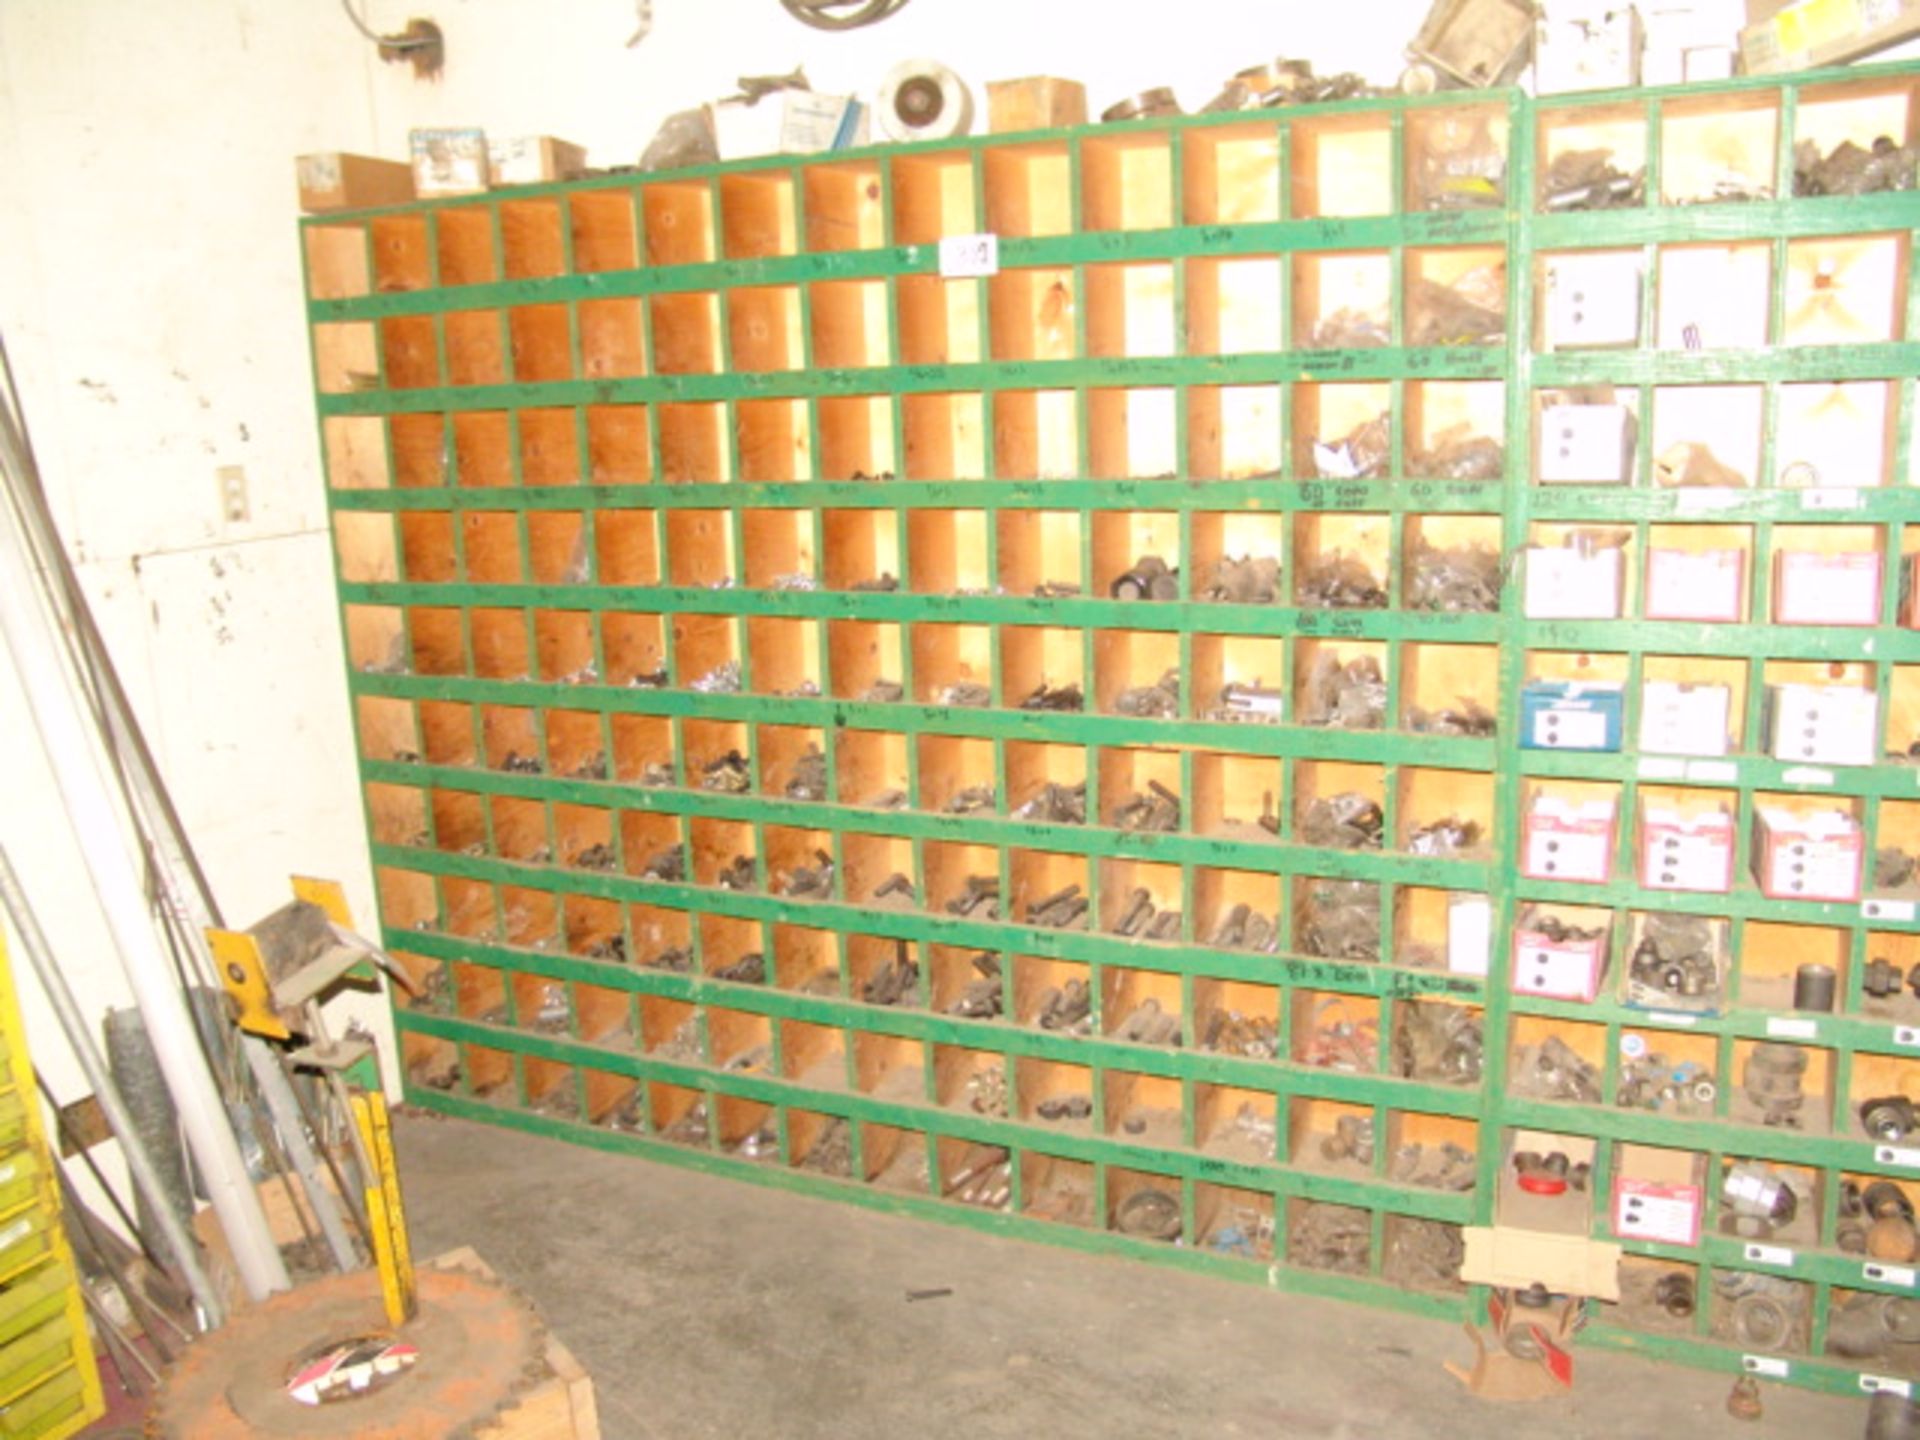 GREEN BOLT BINS & CONTENTS OF BOLTS, FASTENERS,